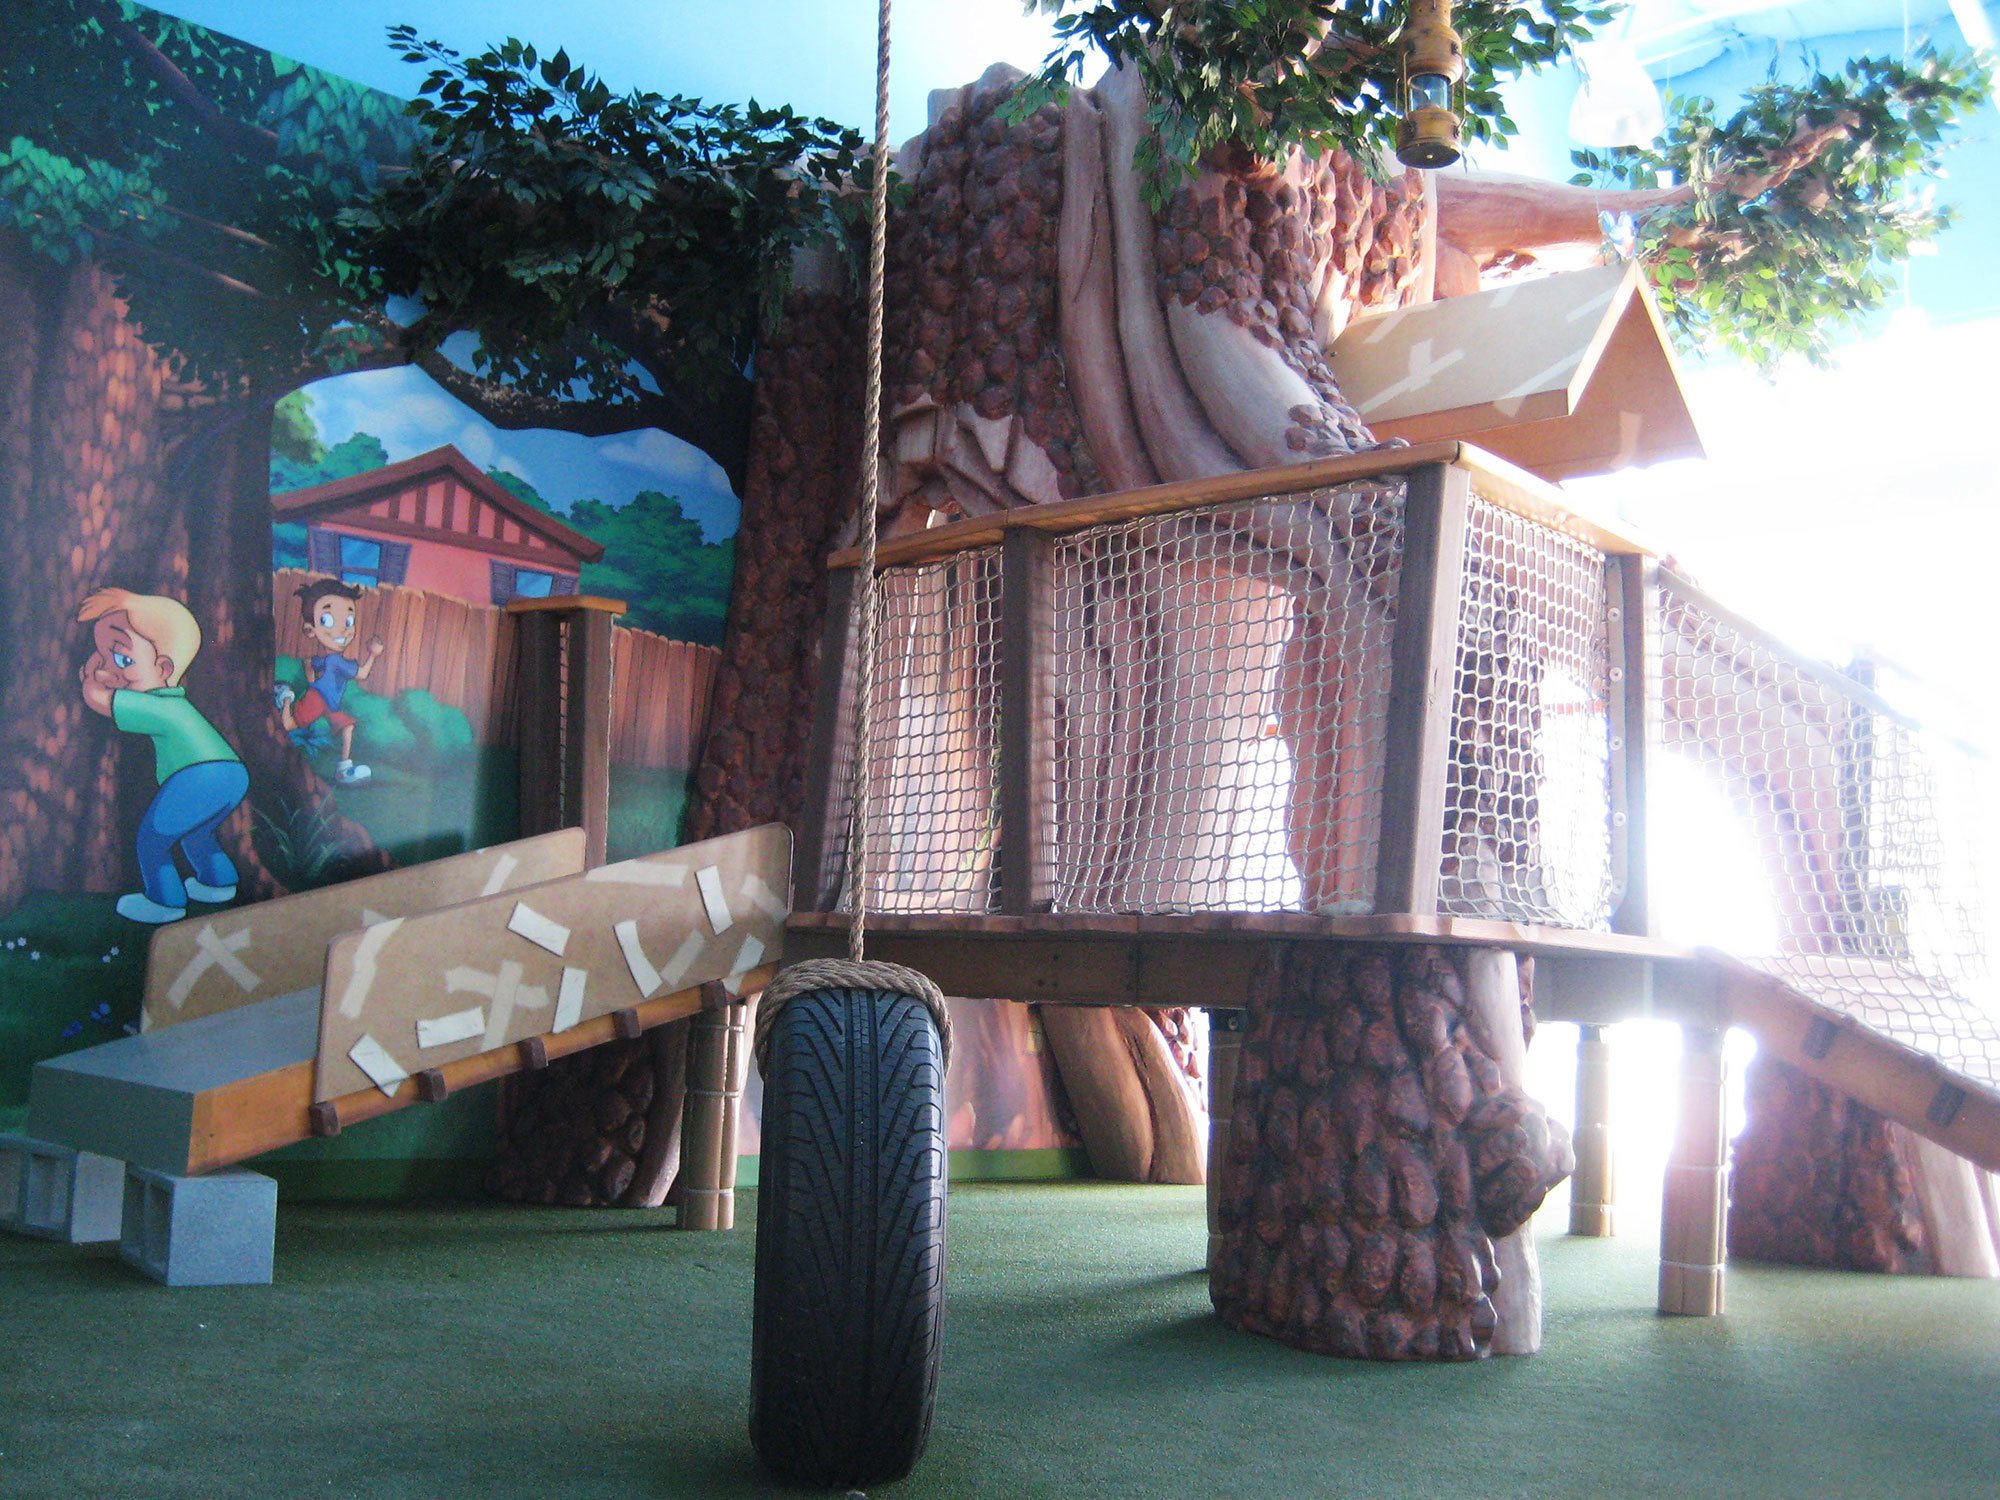 Large 3D sculpted Tree with netted sides and a 3D tire swing in a Treehouse and Neighborhood Themed Environment at Ashley's Playhouse